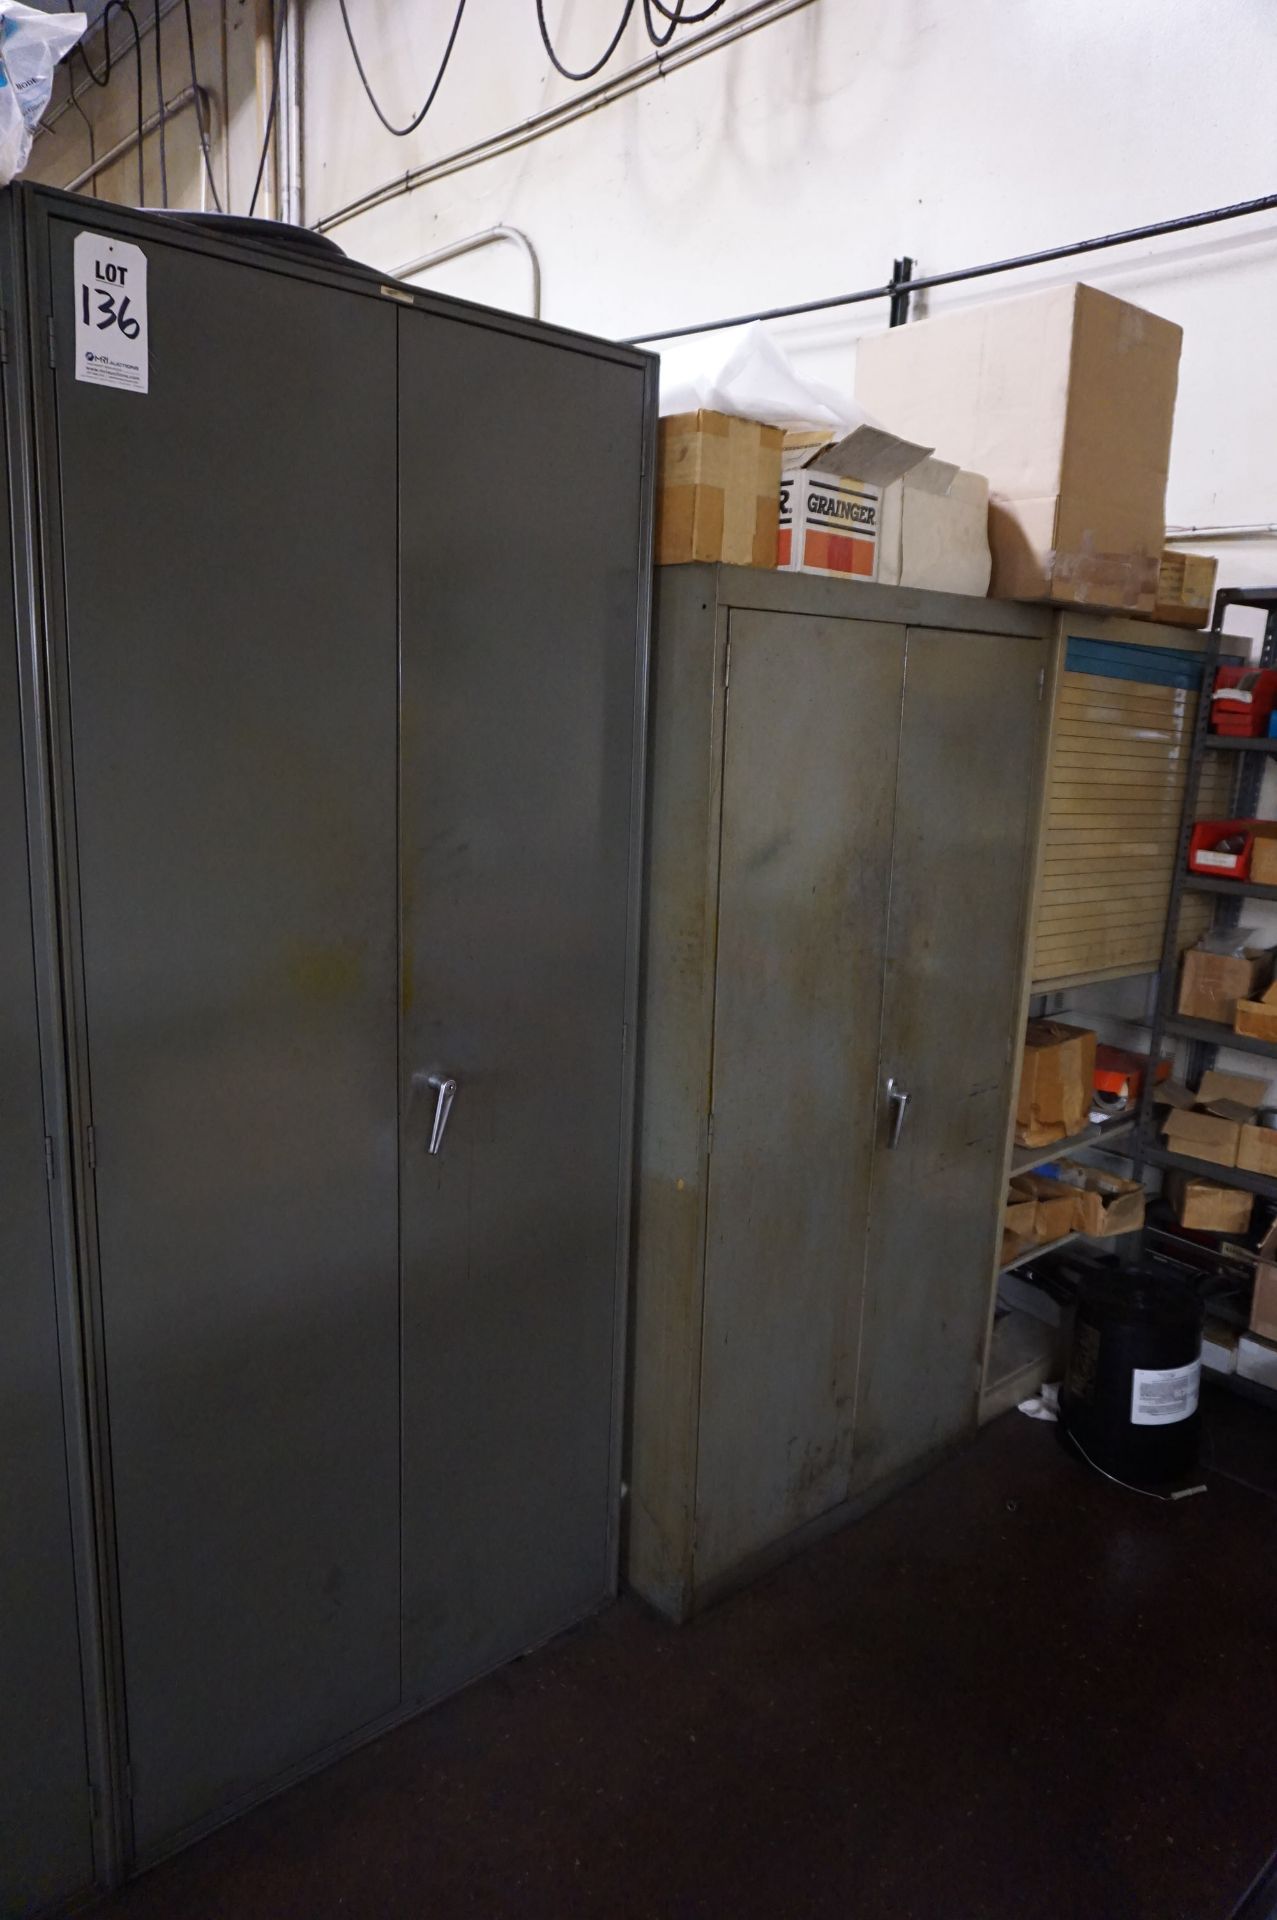 (3) CABINETS WITH MISC. CONTENTS *STILL IN USE, CONTENTS MAY BE MISSING OR MOVED AROUND* **Rigging